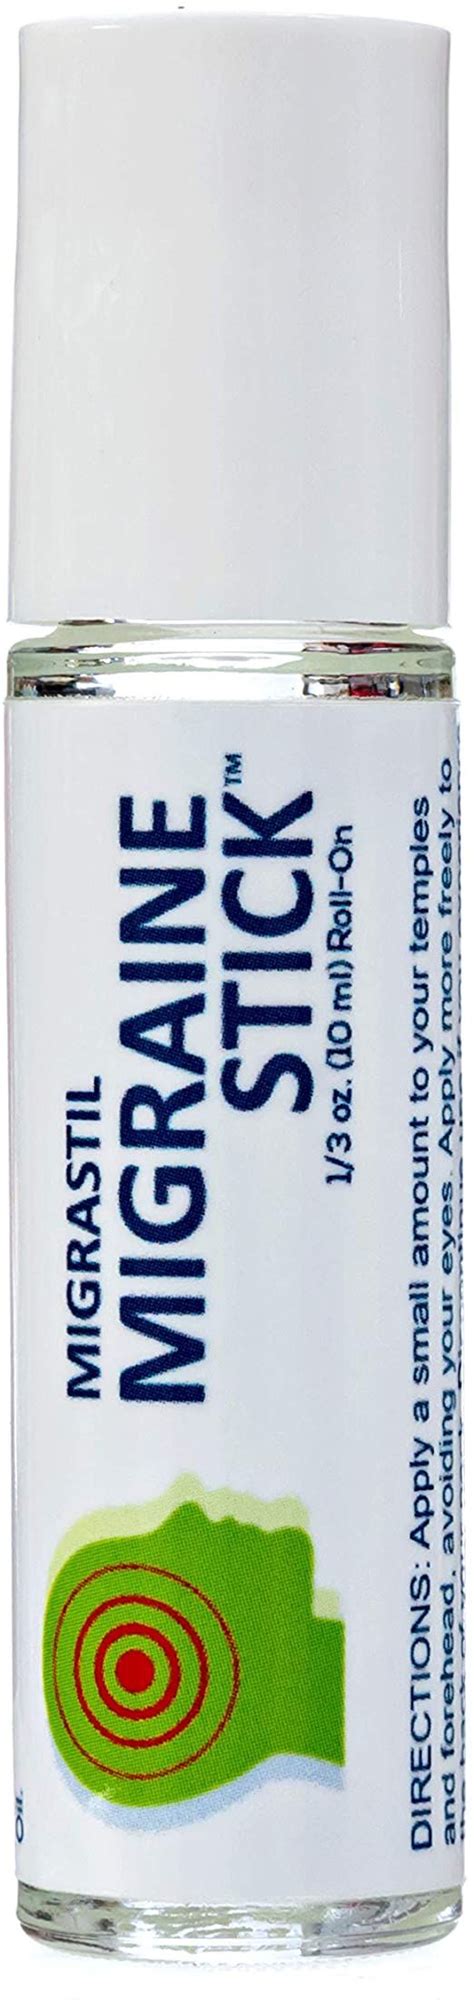 Migrastil Migraine Stick ® Roll On 0 3 Ounce Essential Oil Aromatherapy 10ml